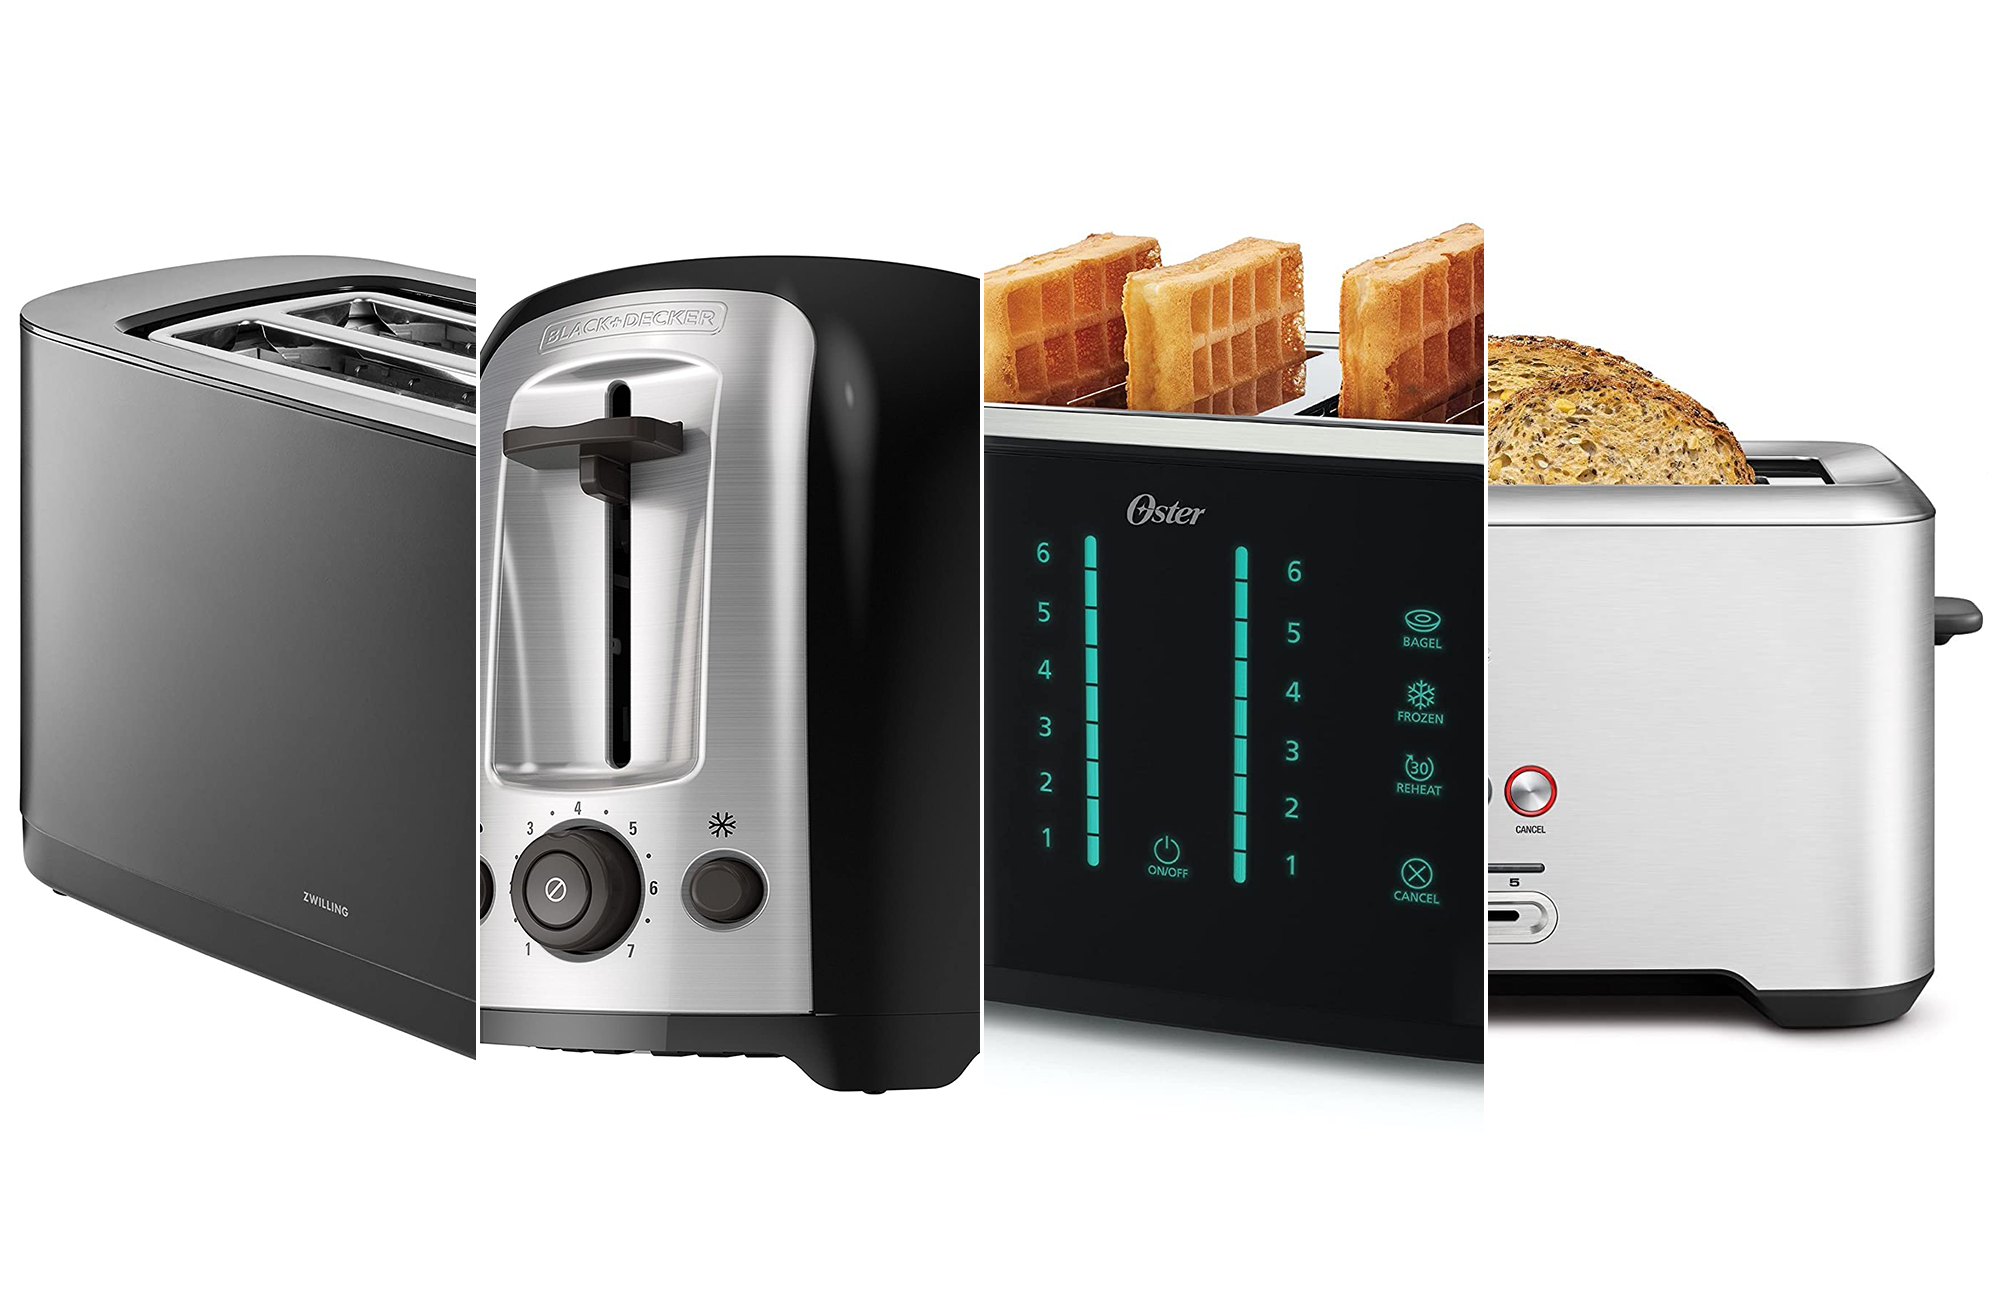 The Best Toasters  Toaster, Cool toasters, Toaster reviews